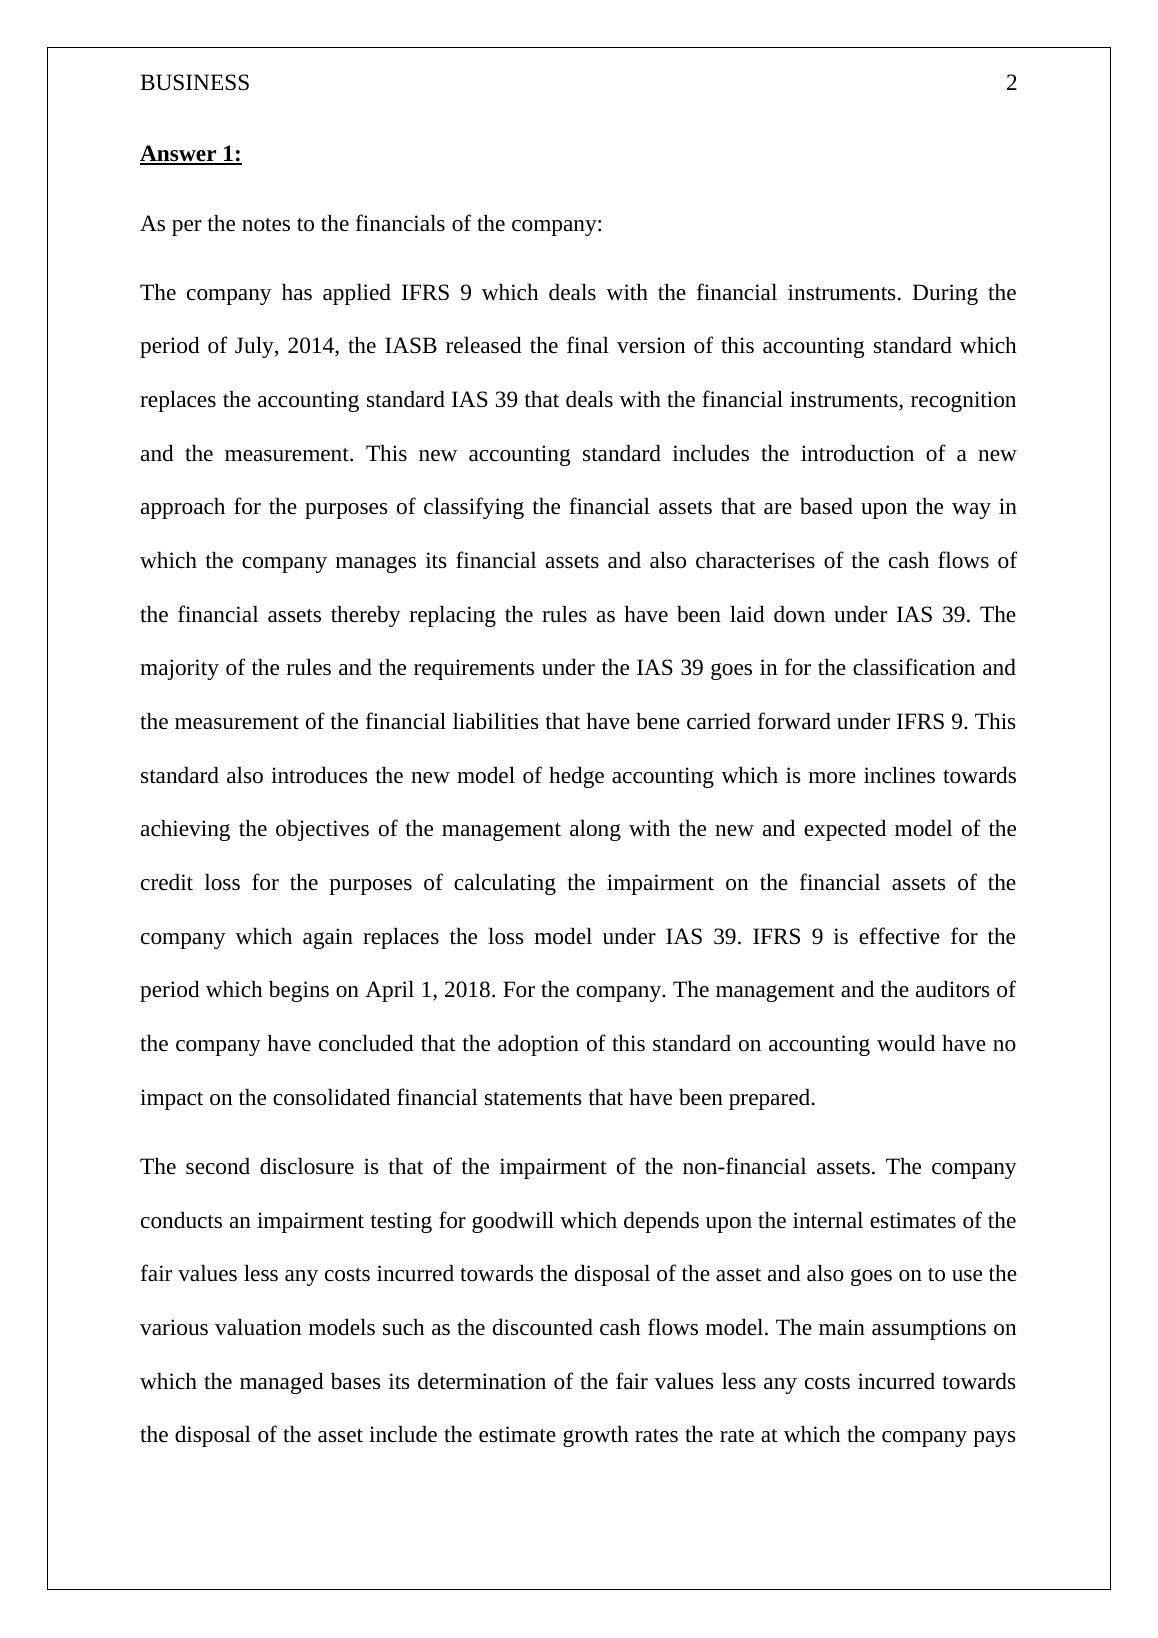 IFRS 9, Impairment of Non-Financial Assets, Income Taxes - Notes to Financials_2